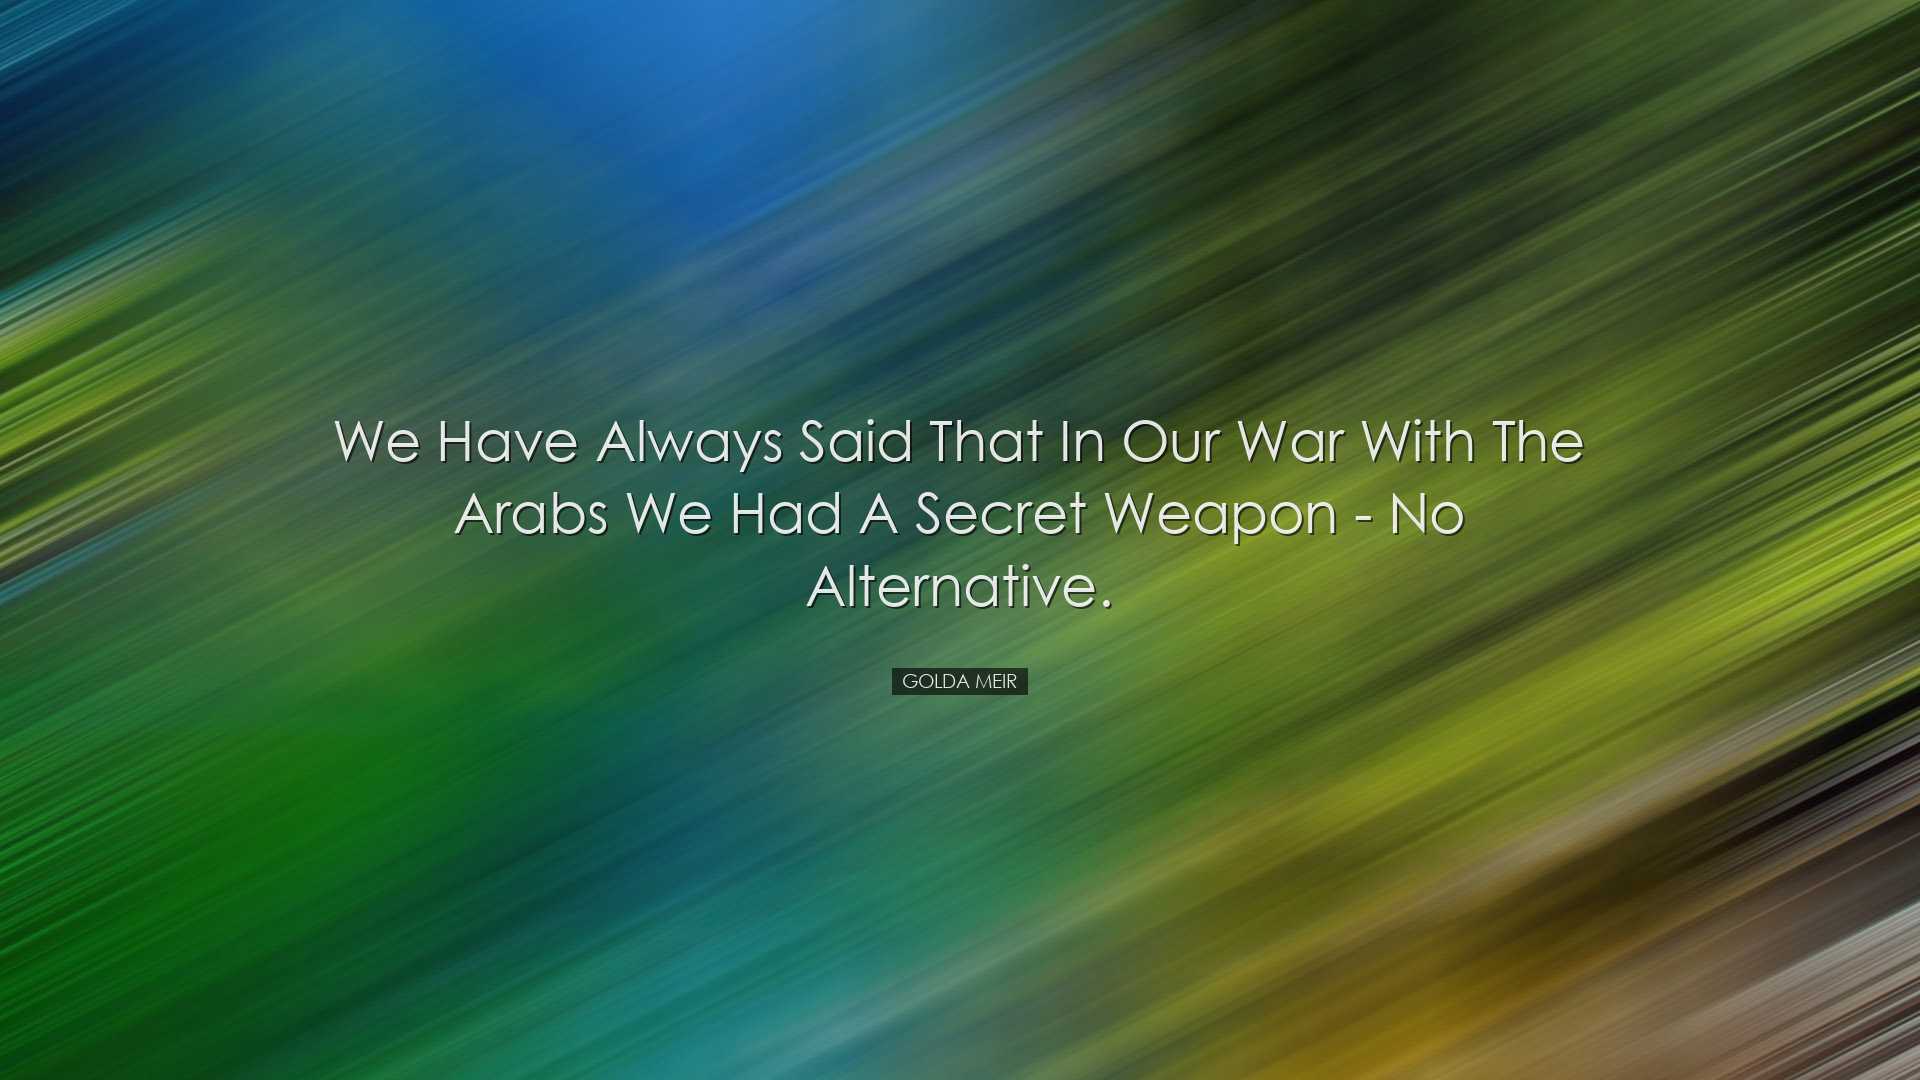 We have always said that in our war with the Arabs we had a secret